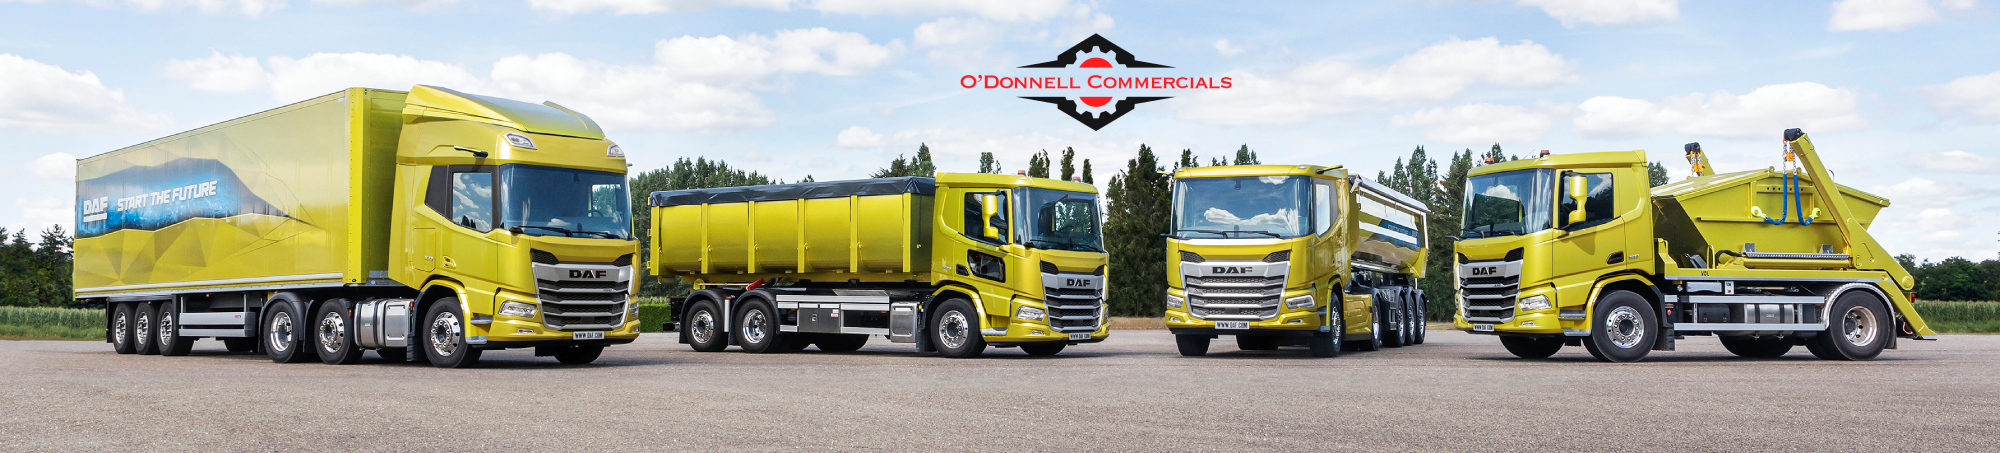 Daf Truck Parts Donegal